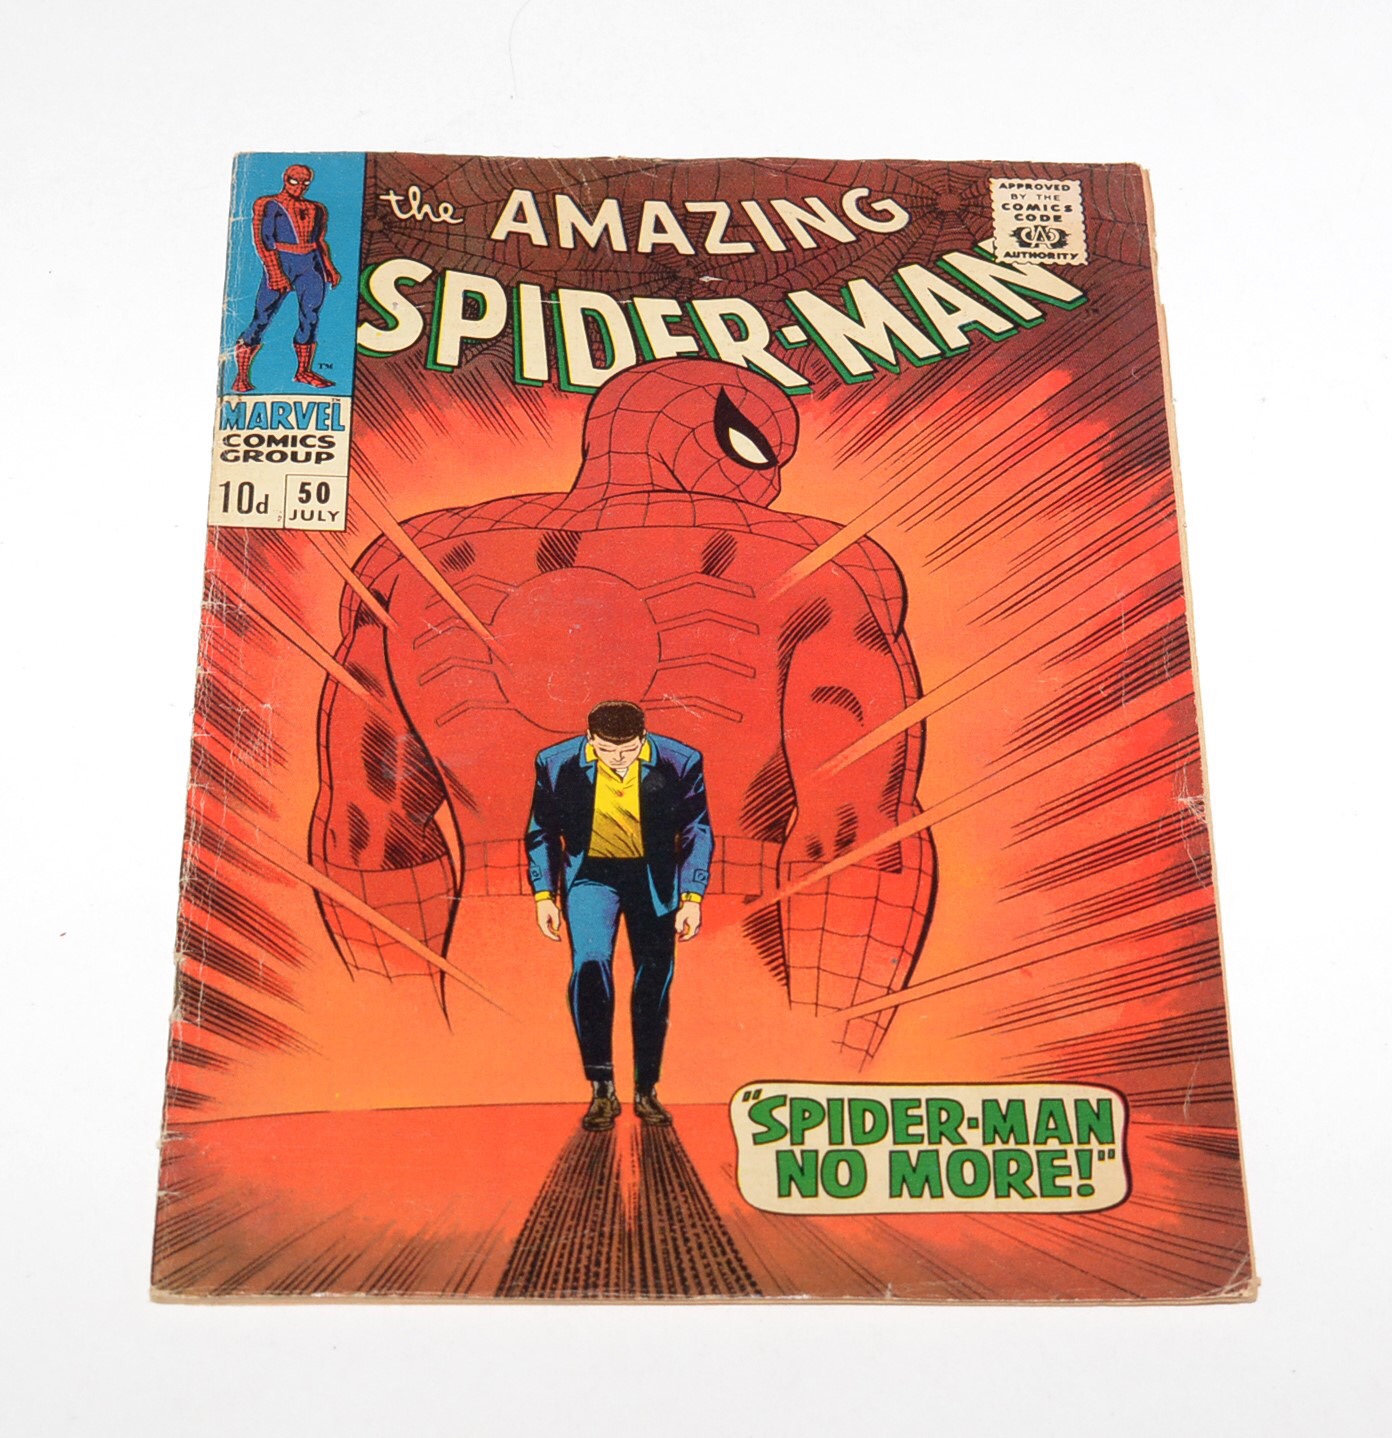 The Amazing Spider-Man #50 (Pence Copy)